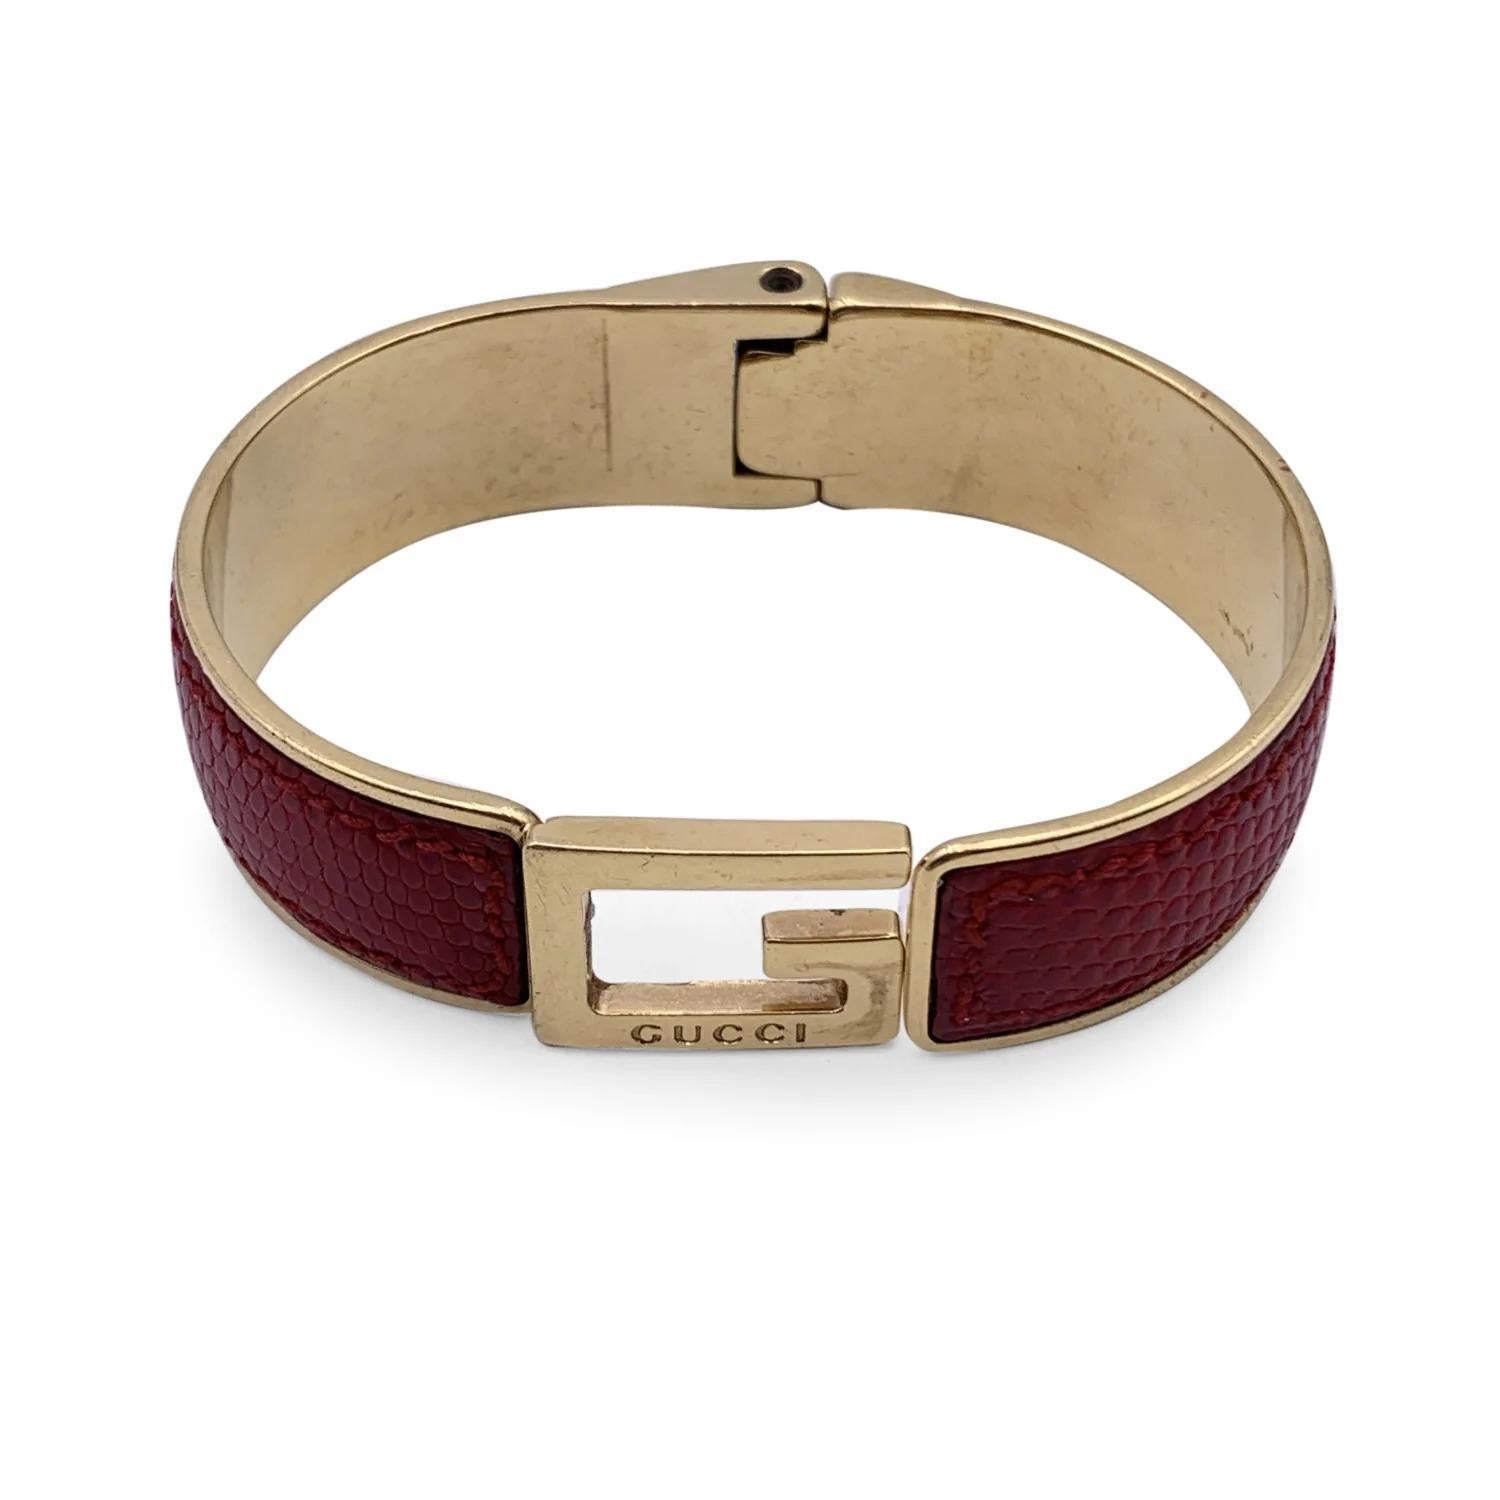 Gold-Tone Stainless steel bangle bracelet with G logo by GUCCI. Red leather. Spring hinge for easy wearing. Made in Italy. Diameter (Max width): 2.5 inches - 6.5 cm, min width: 2 inches - 5 cm. Internal circumference: 7.5 inches - 19.05 cm

A -